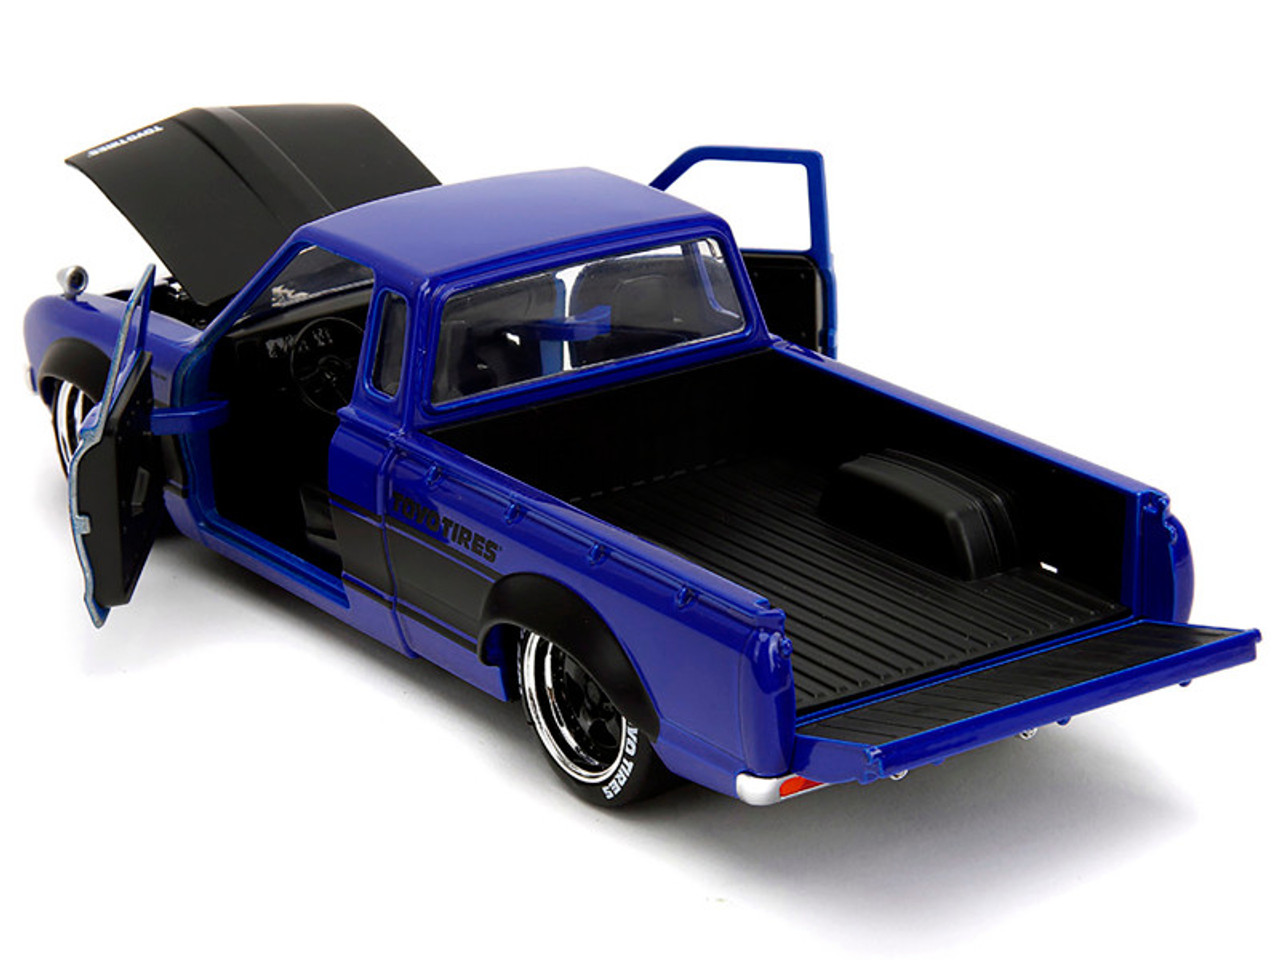 1972 Datsun 620 Pickup Truck #72 Blue Metallic with Black Stripes and Hood "Toyo Tires" with Extra Wheels "Just Trucks" Series 1/24 Diecast Model Car by Jada